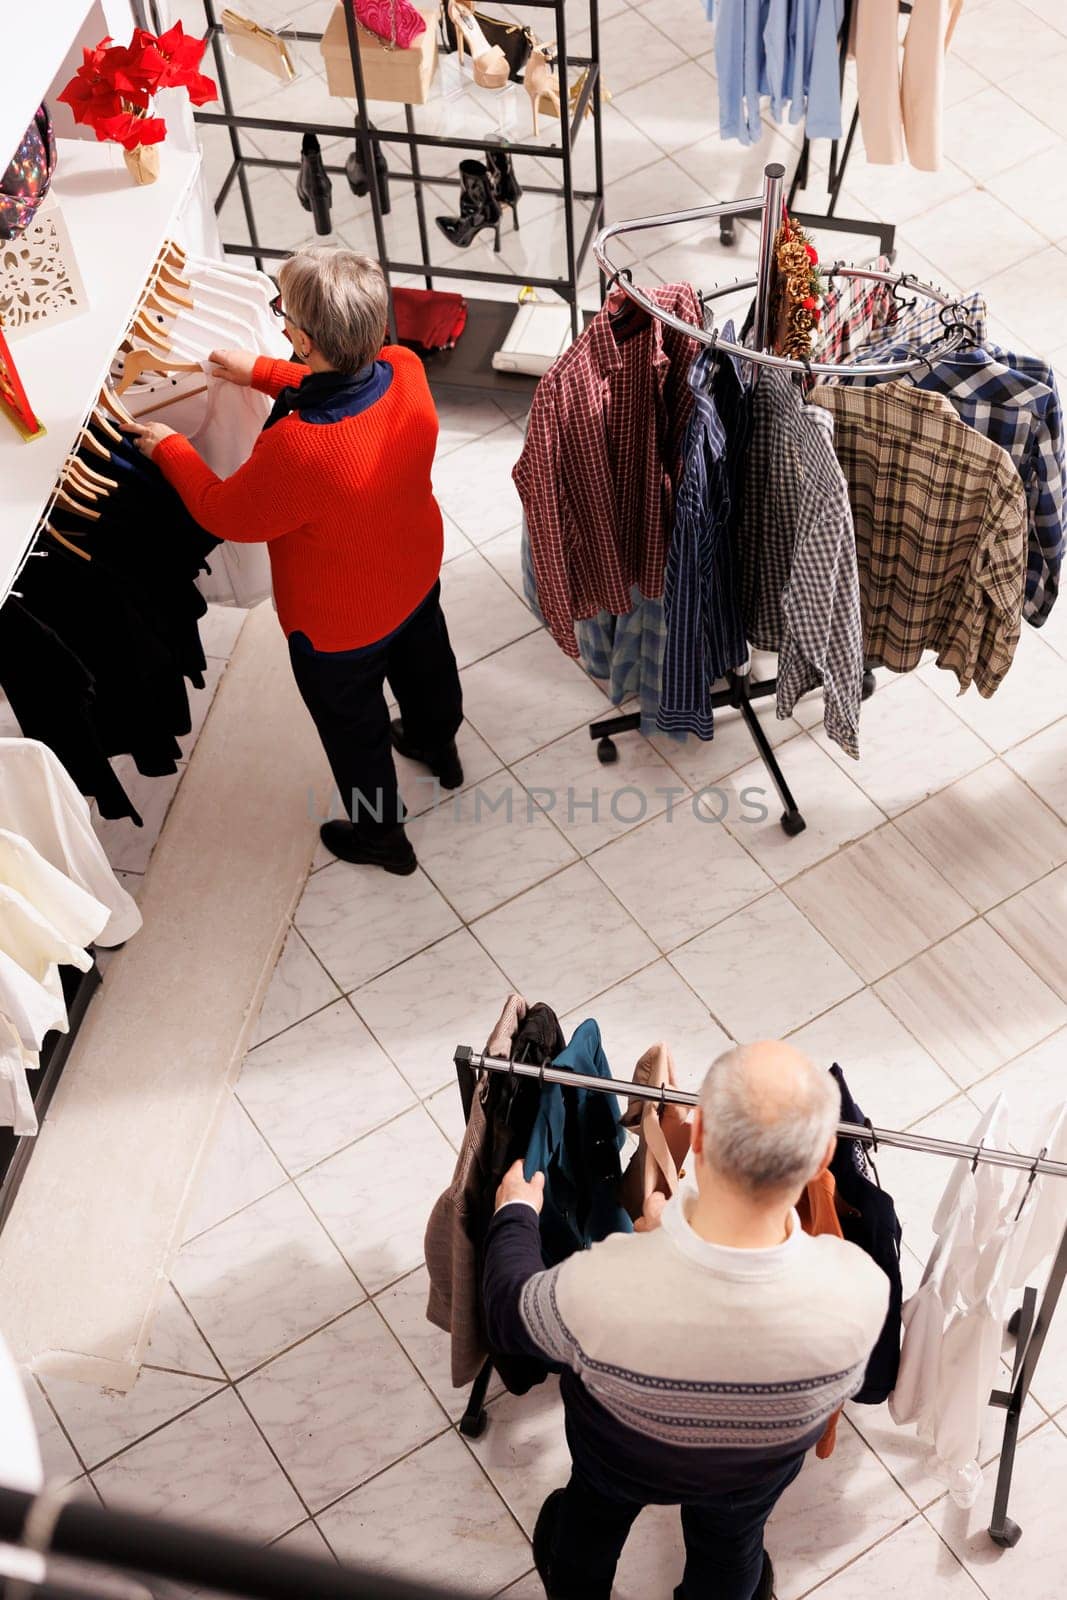 Senior people browsing for clothes on hangers and looking for perfect formal outfit to attend christmas dinner festivity. Elderly couple doing shopping spree at mall during sales season.